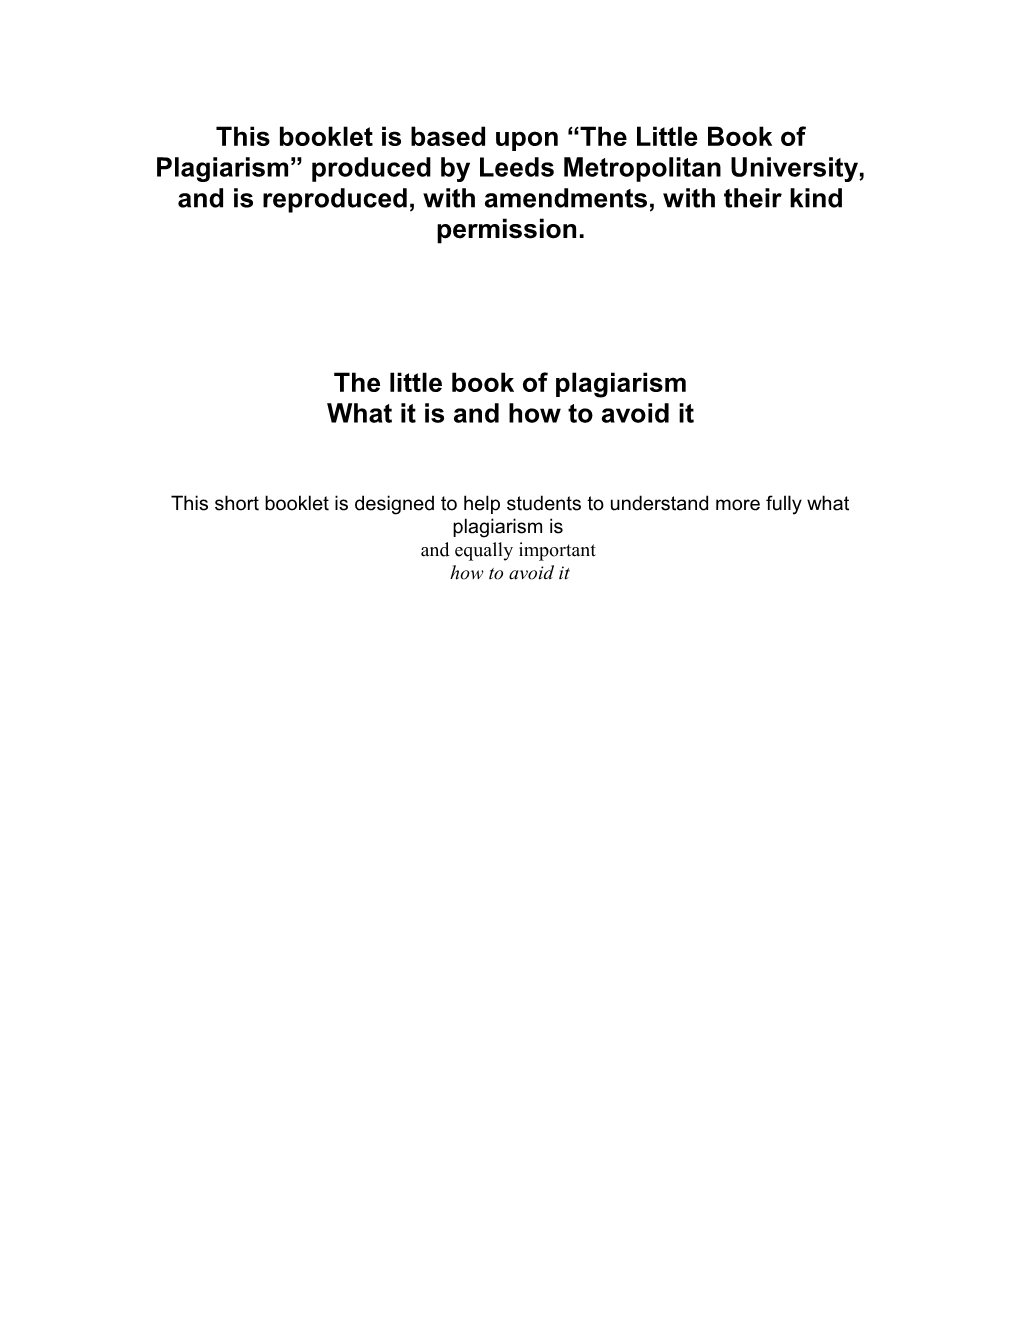 This Booklet Is Based Upon the Little Book of Plagiarism Produced by Leeds Metropolitan